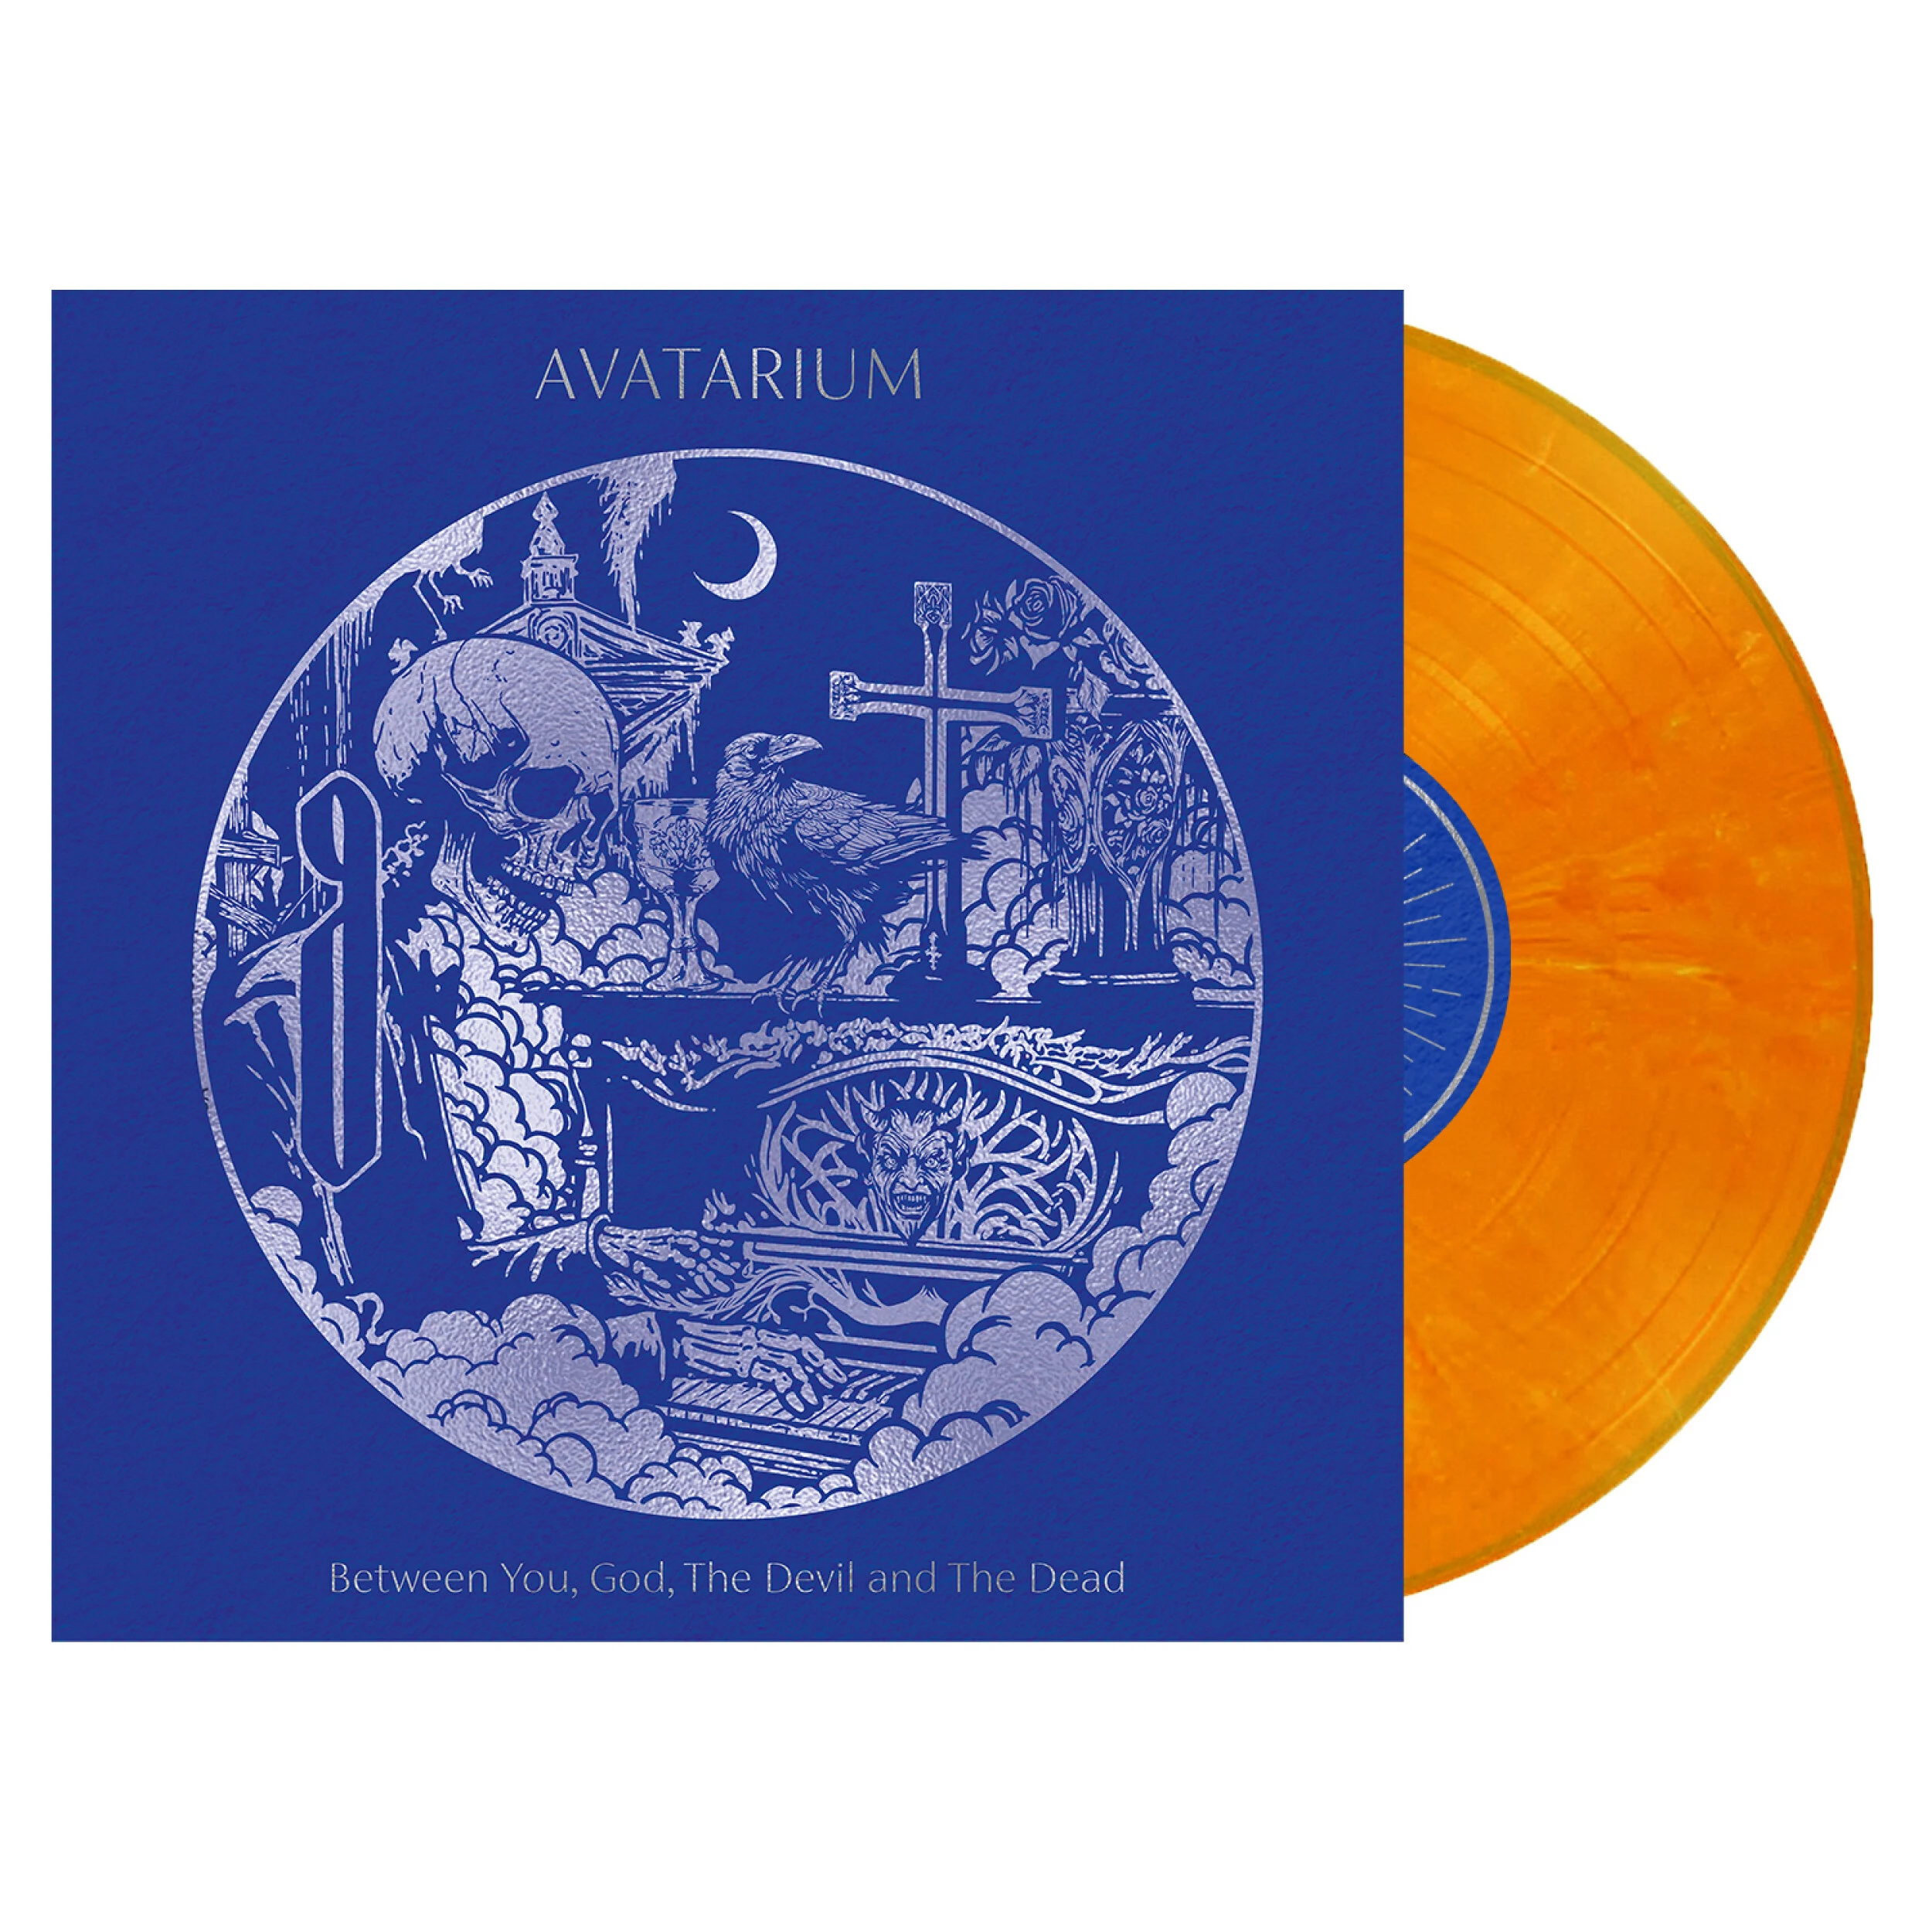 AVATARIUM - Between You, God, The Devil and The Dead [ORANGE/WHITE MARBLED LP]